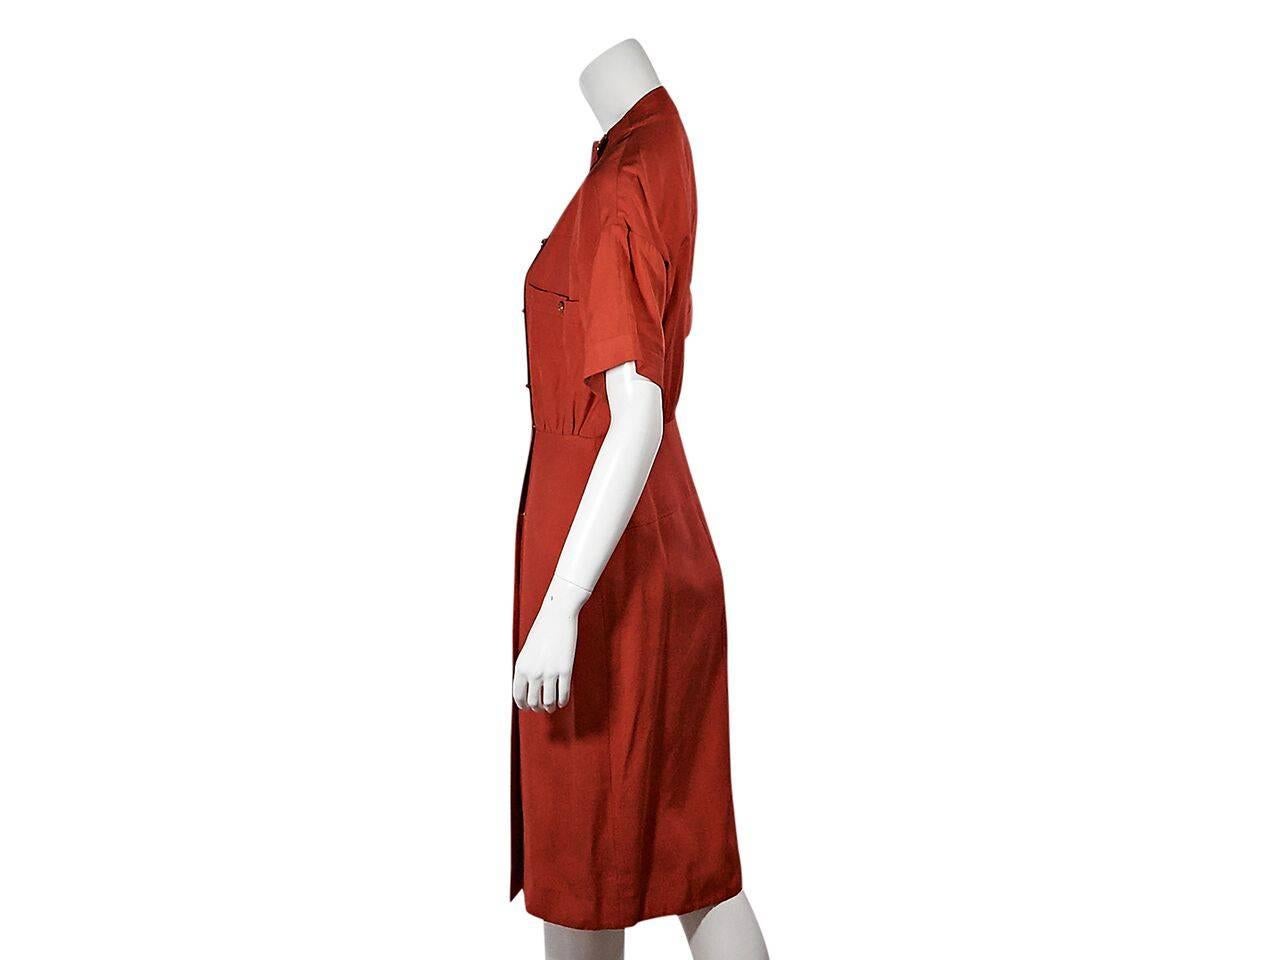 Product details:  Vintage red dress by Chanel.  Banded crewneck.  Short sleeves.  Double breasted closure.  Chest button patch pockets.  Goldtone hardware.  Size M. 
Condition: Pre-owned. Very good.  
Est. Retail $ 1900.00